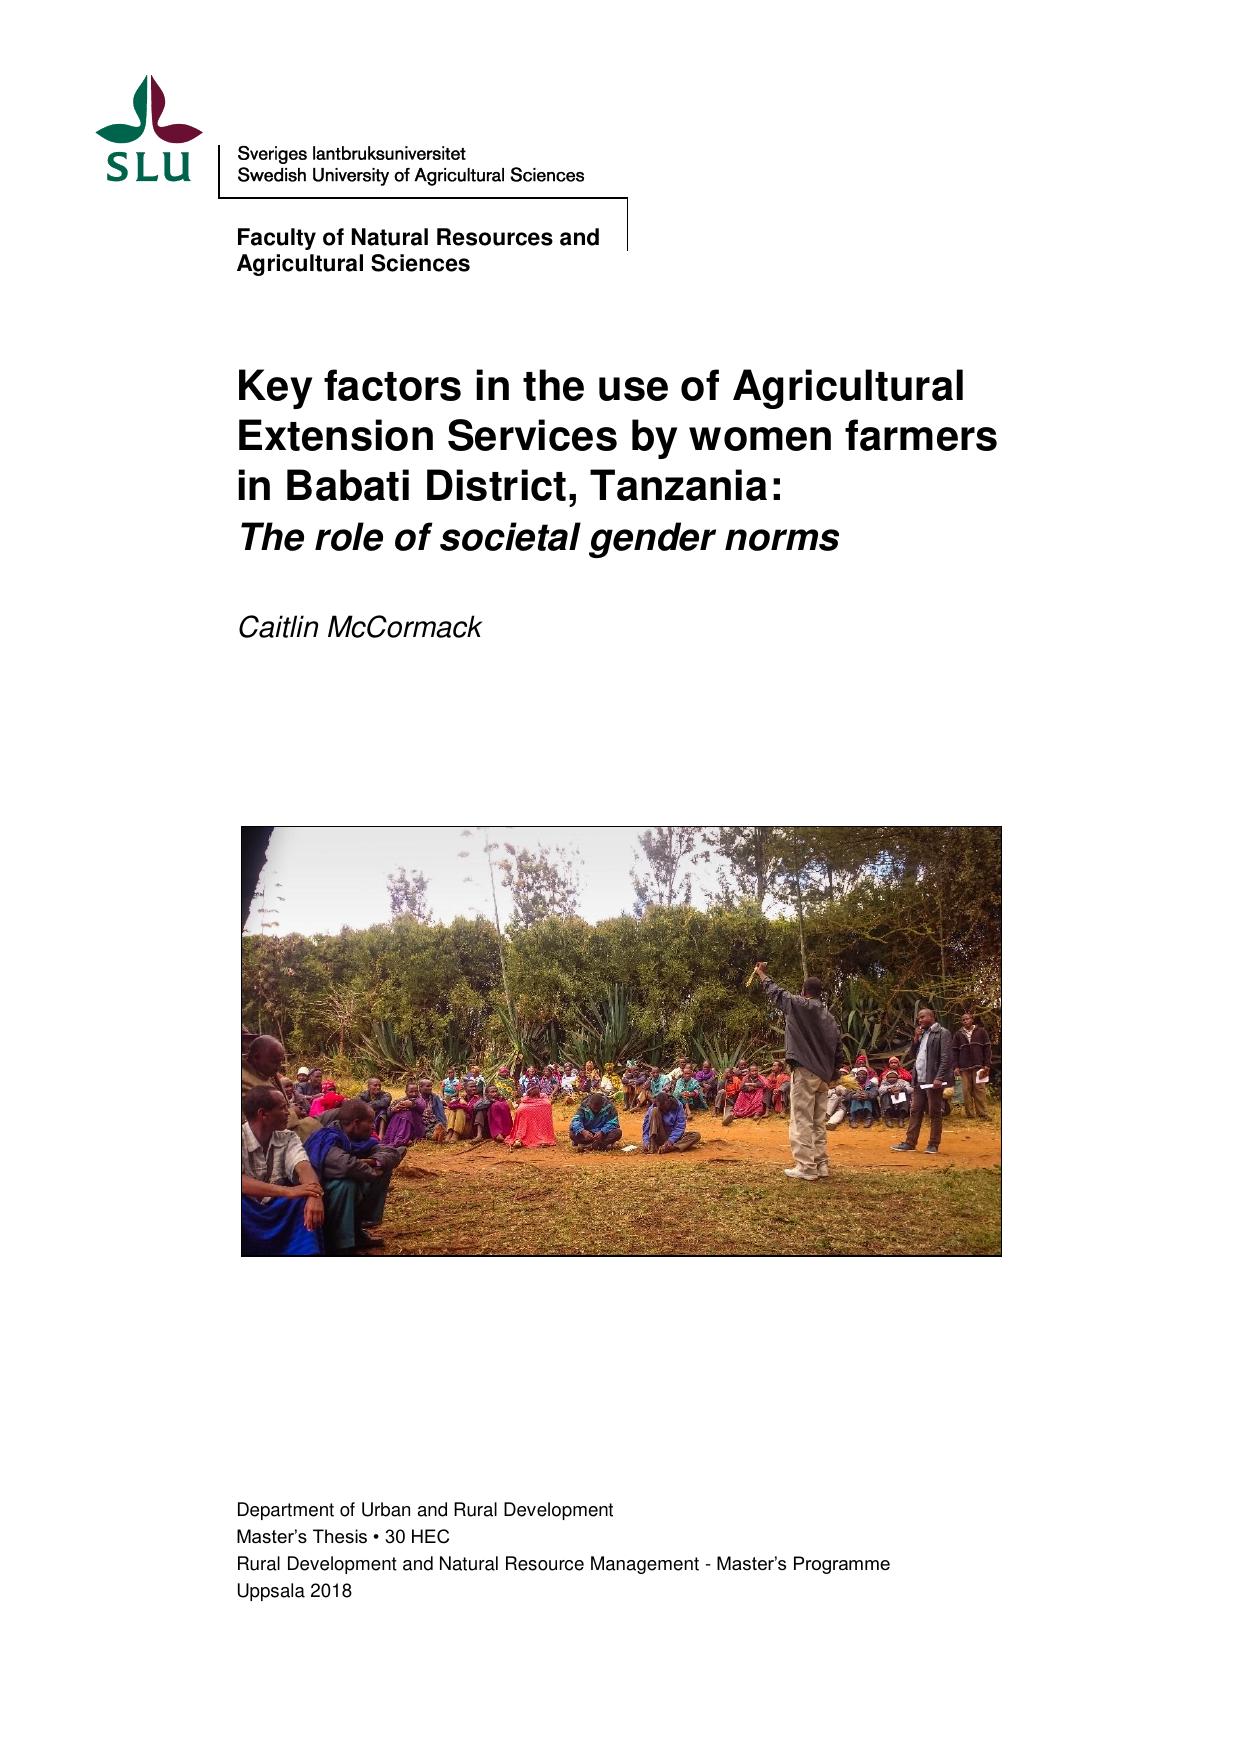 Key factors in the use of Agricultural Extension Services by women farmers 2018